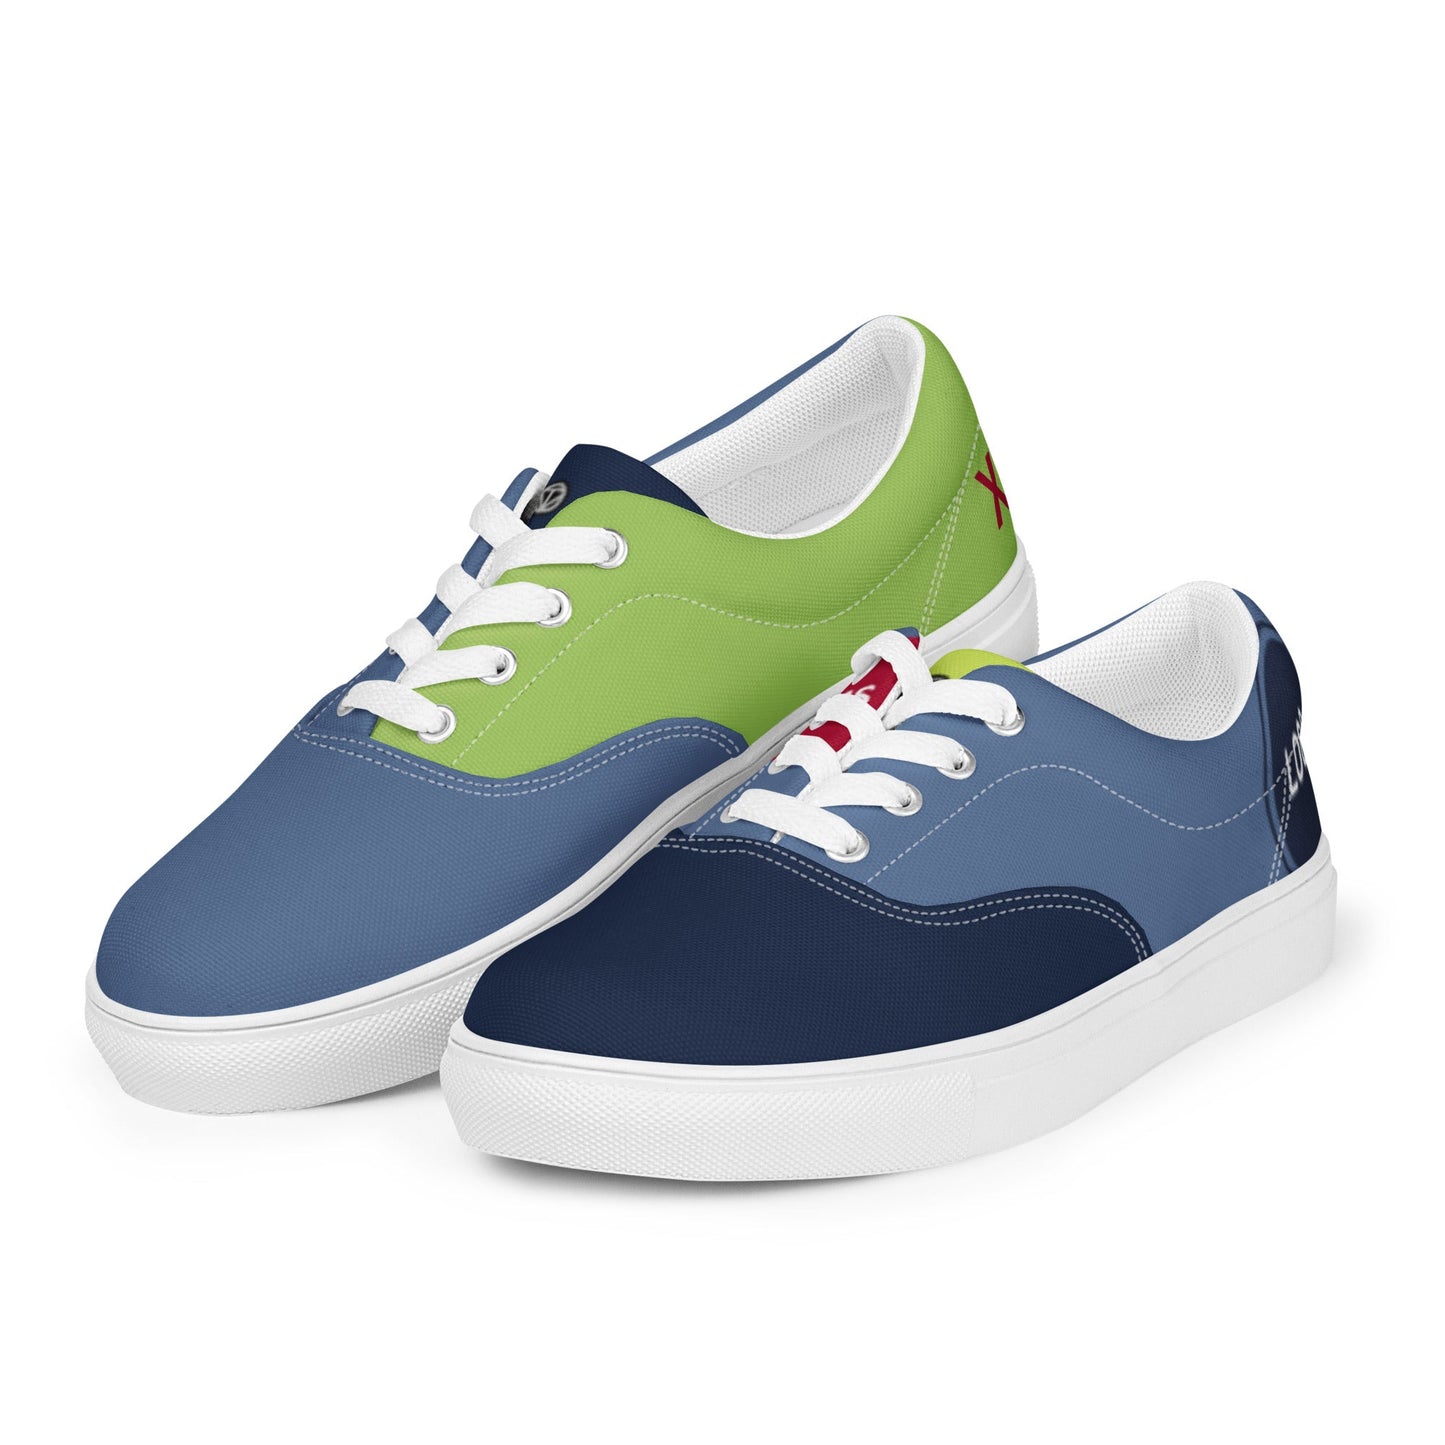 TIME OF VIBES - Women’s lace-up canvas shoes Demo CORPORATE - €109.00